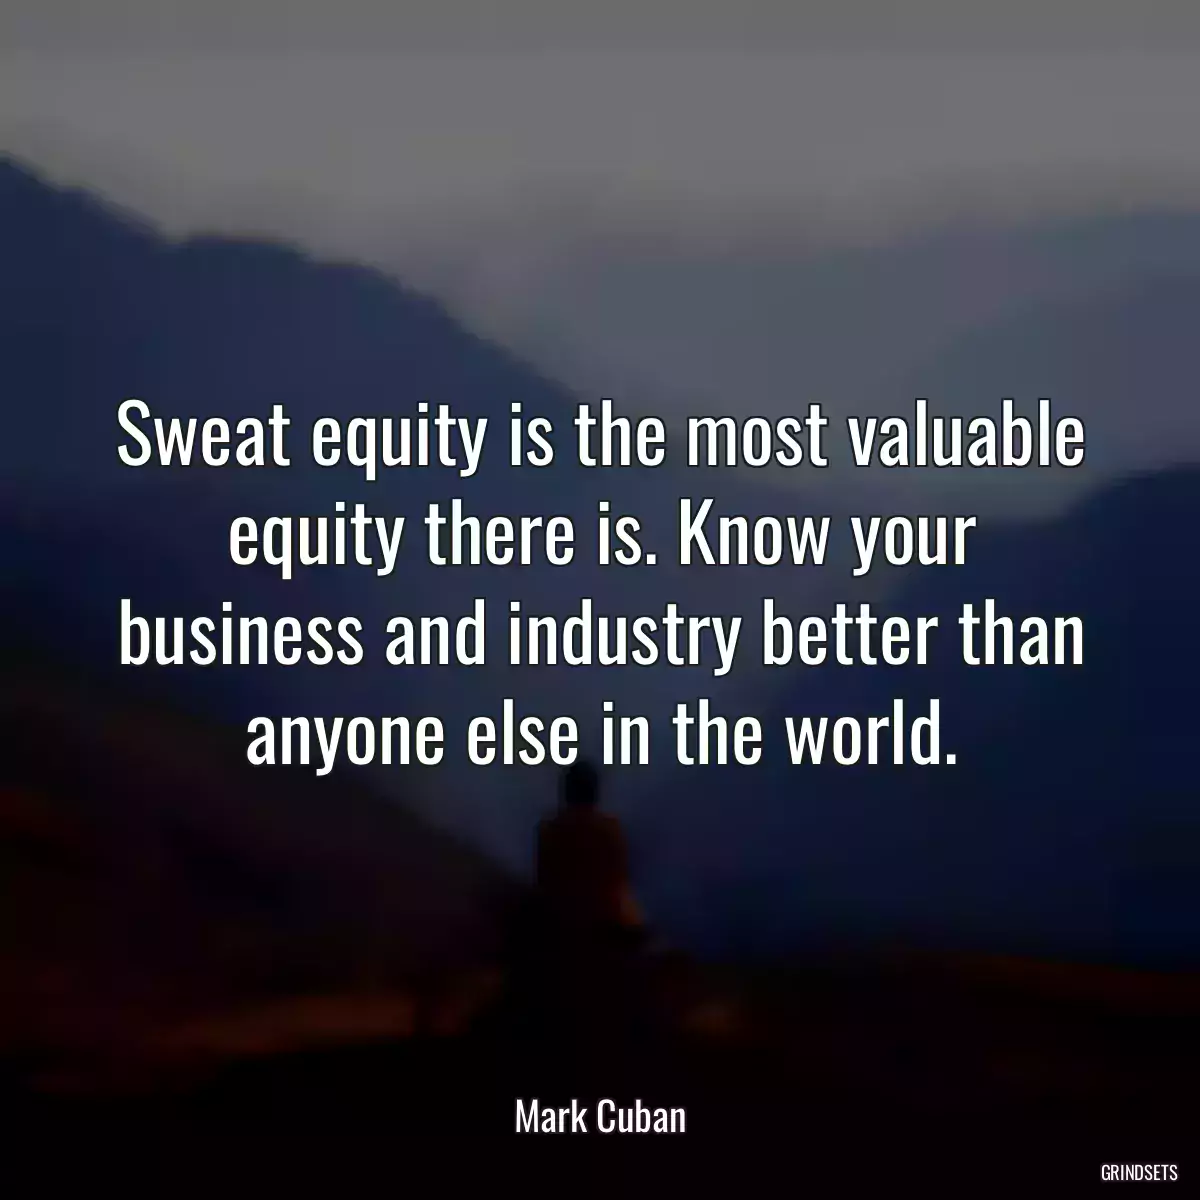 Sweat equity is the most valuable equity there is. Know your business and industry better than anyone else in the world.